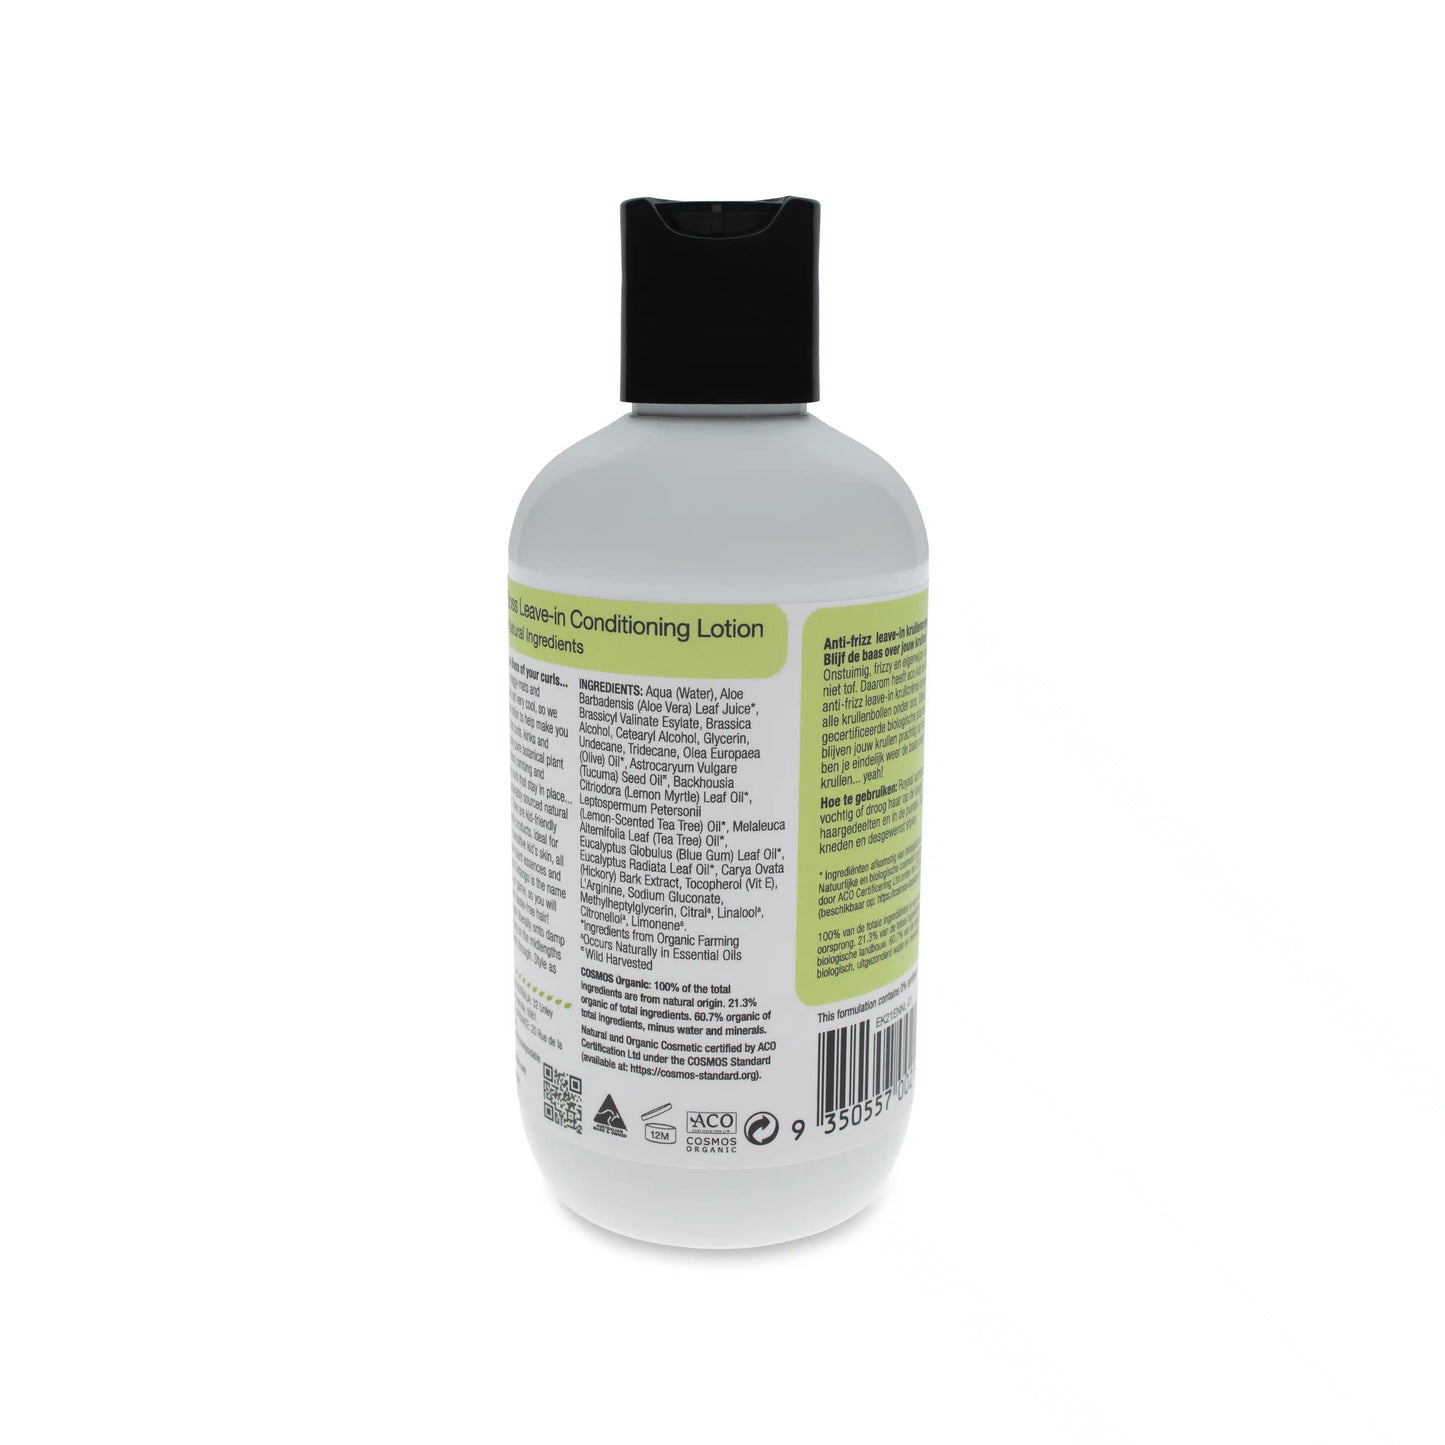 Detango Curl Boss Leave-In Conditioning Lotion 225ml